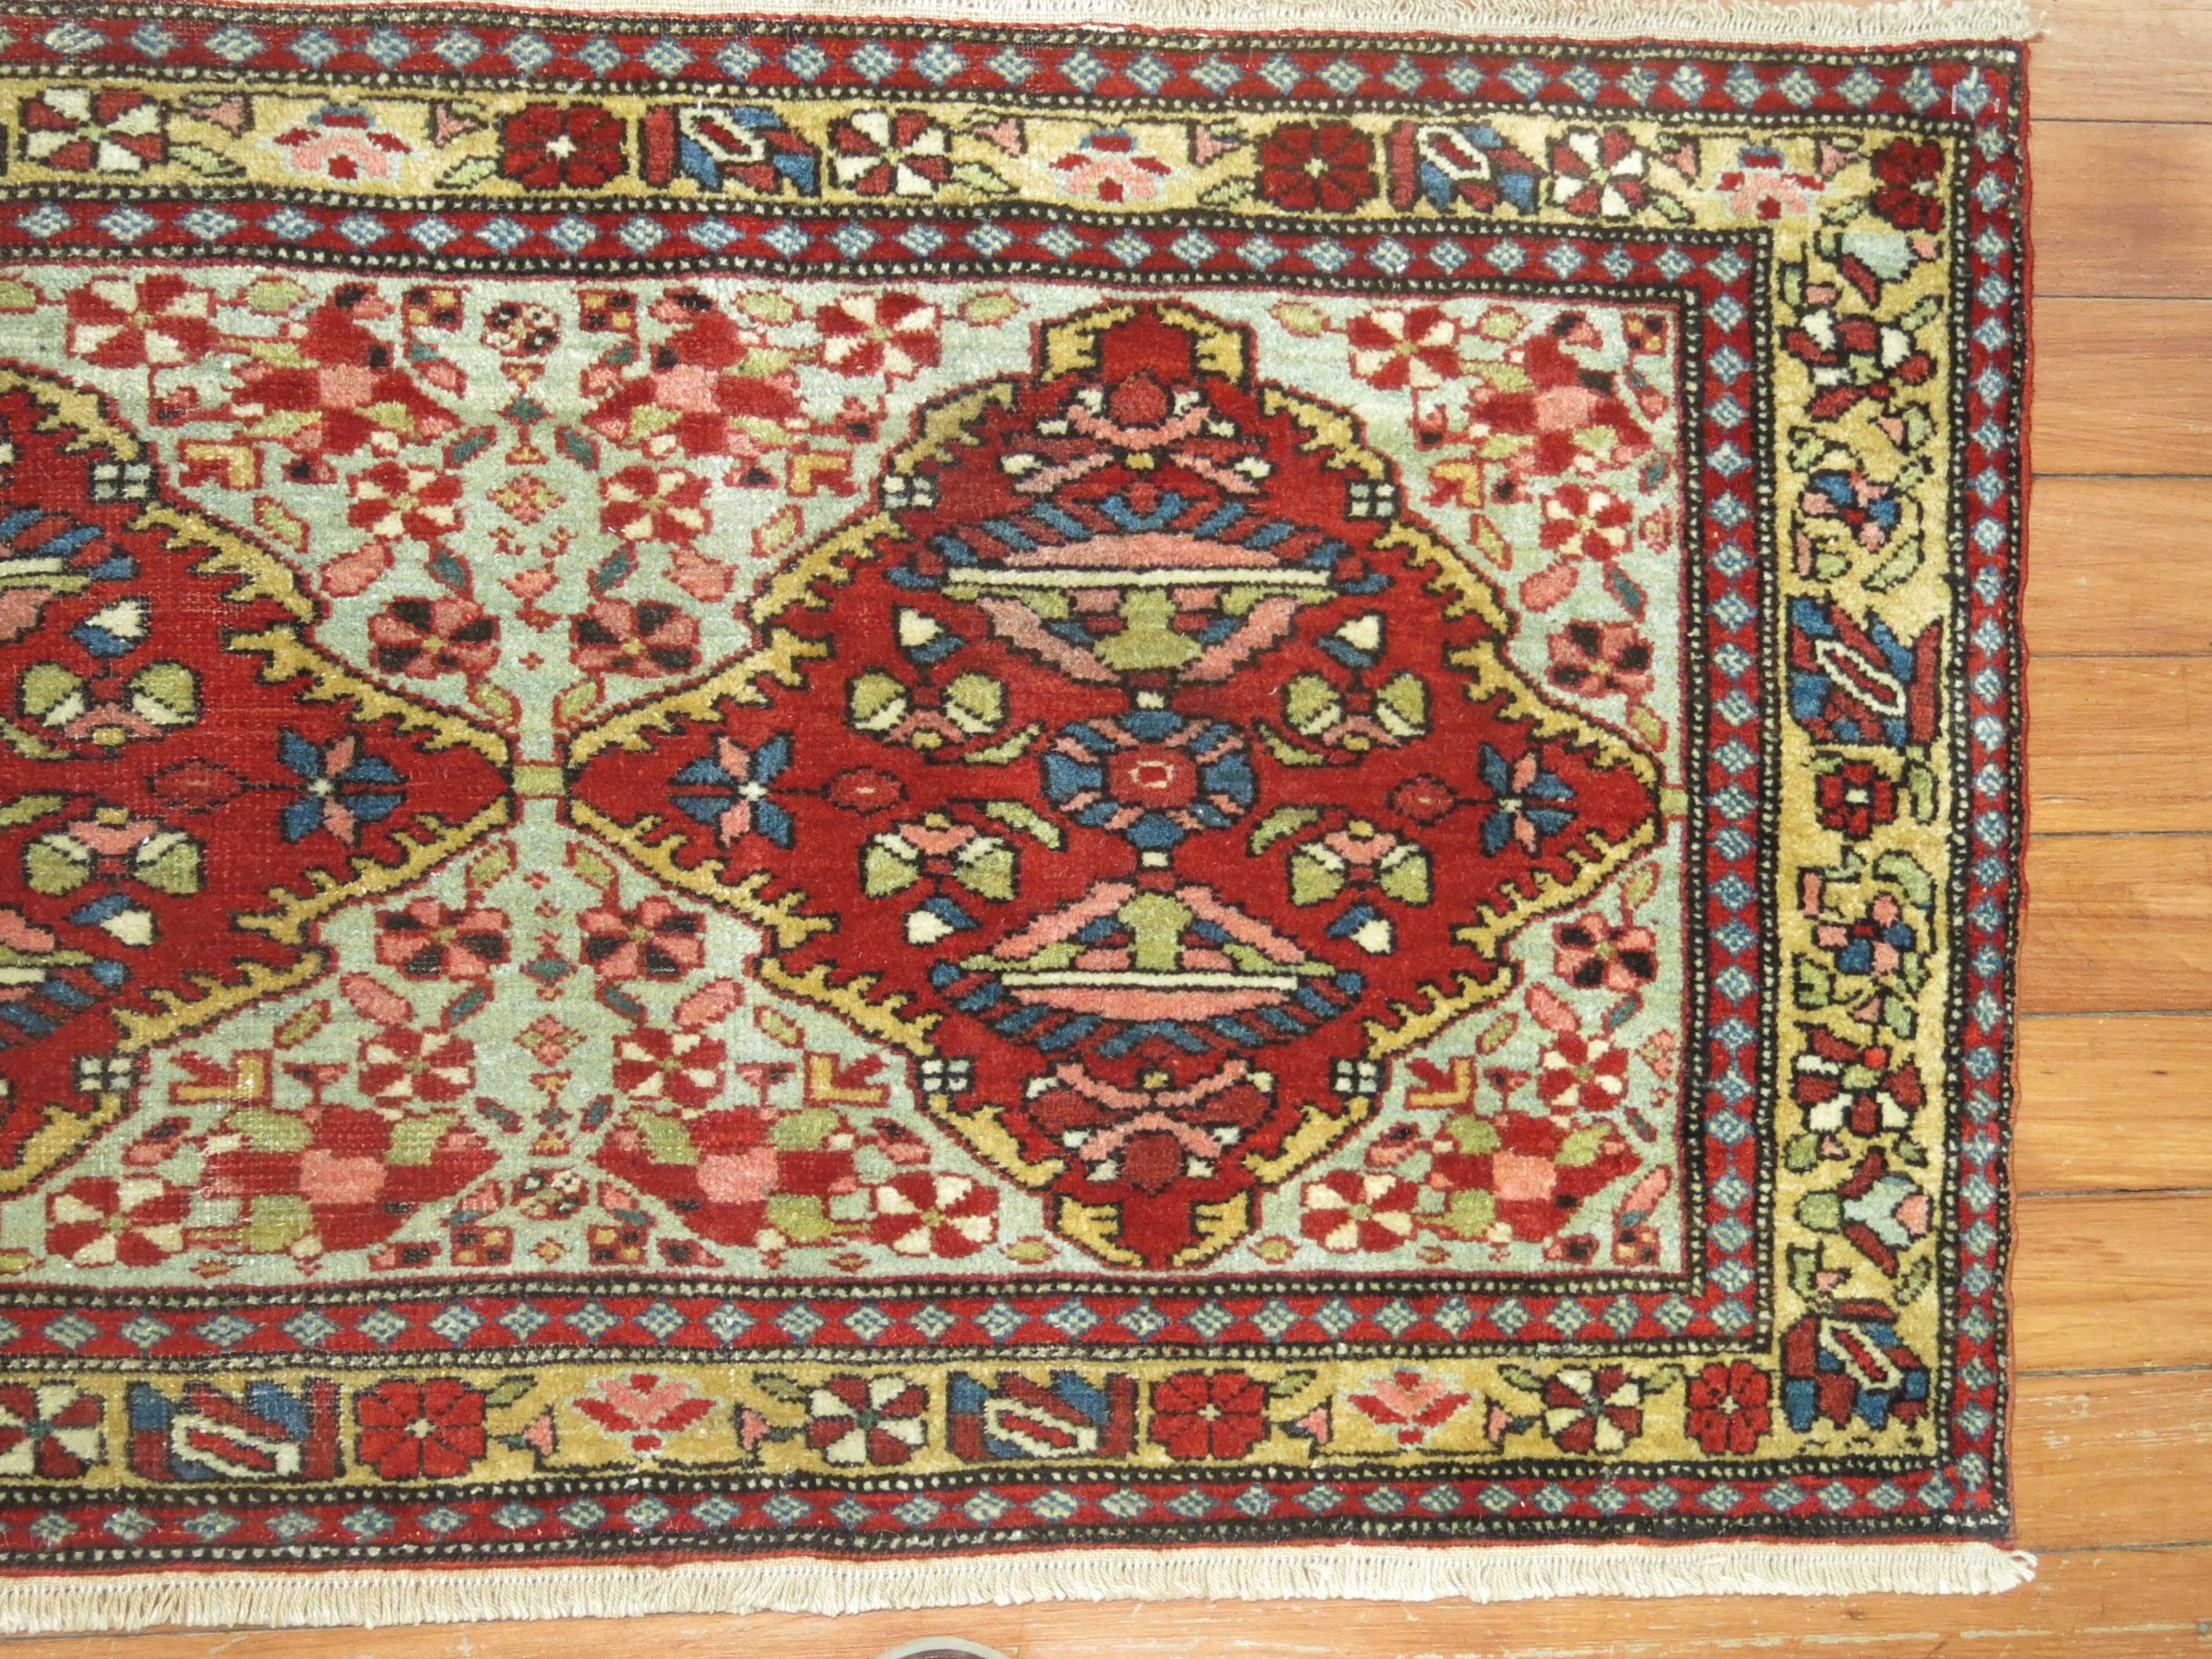 Wool Jewel Tone Fine Quality Antique Persian Malayer Narrow Horizontal Woven Rug For Sale